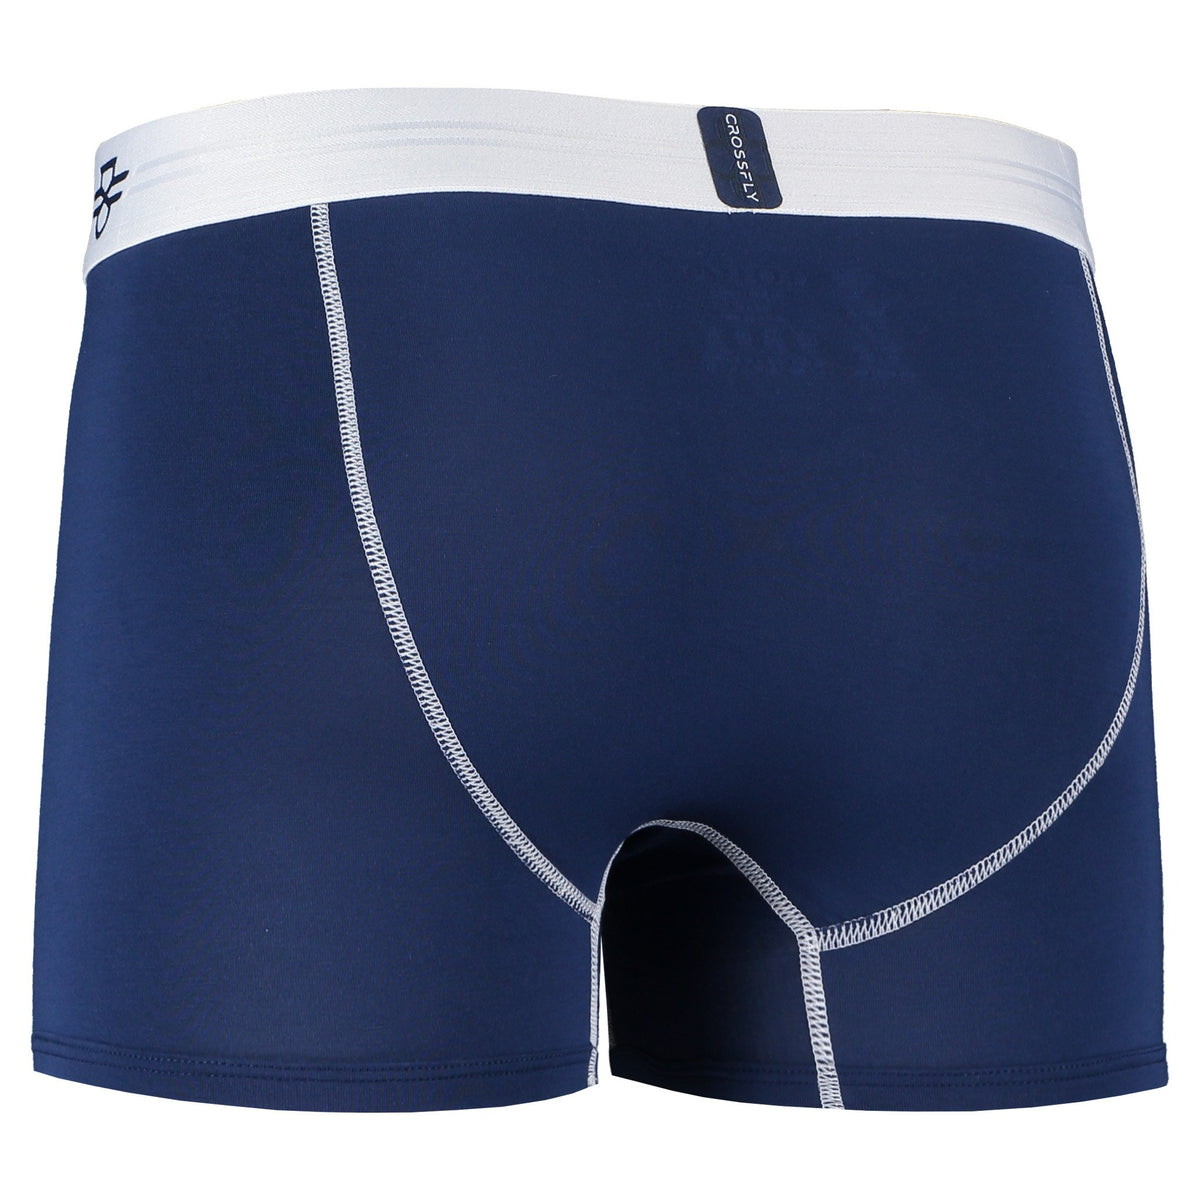 Crossfly men&#39;s IKON X 3&quot; navy / white trunks from the Everyday series, featuring X-Fly and Coccoon internal pocket support.